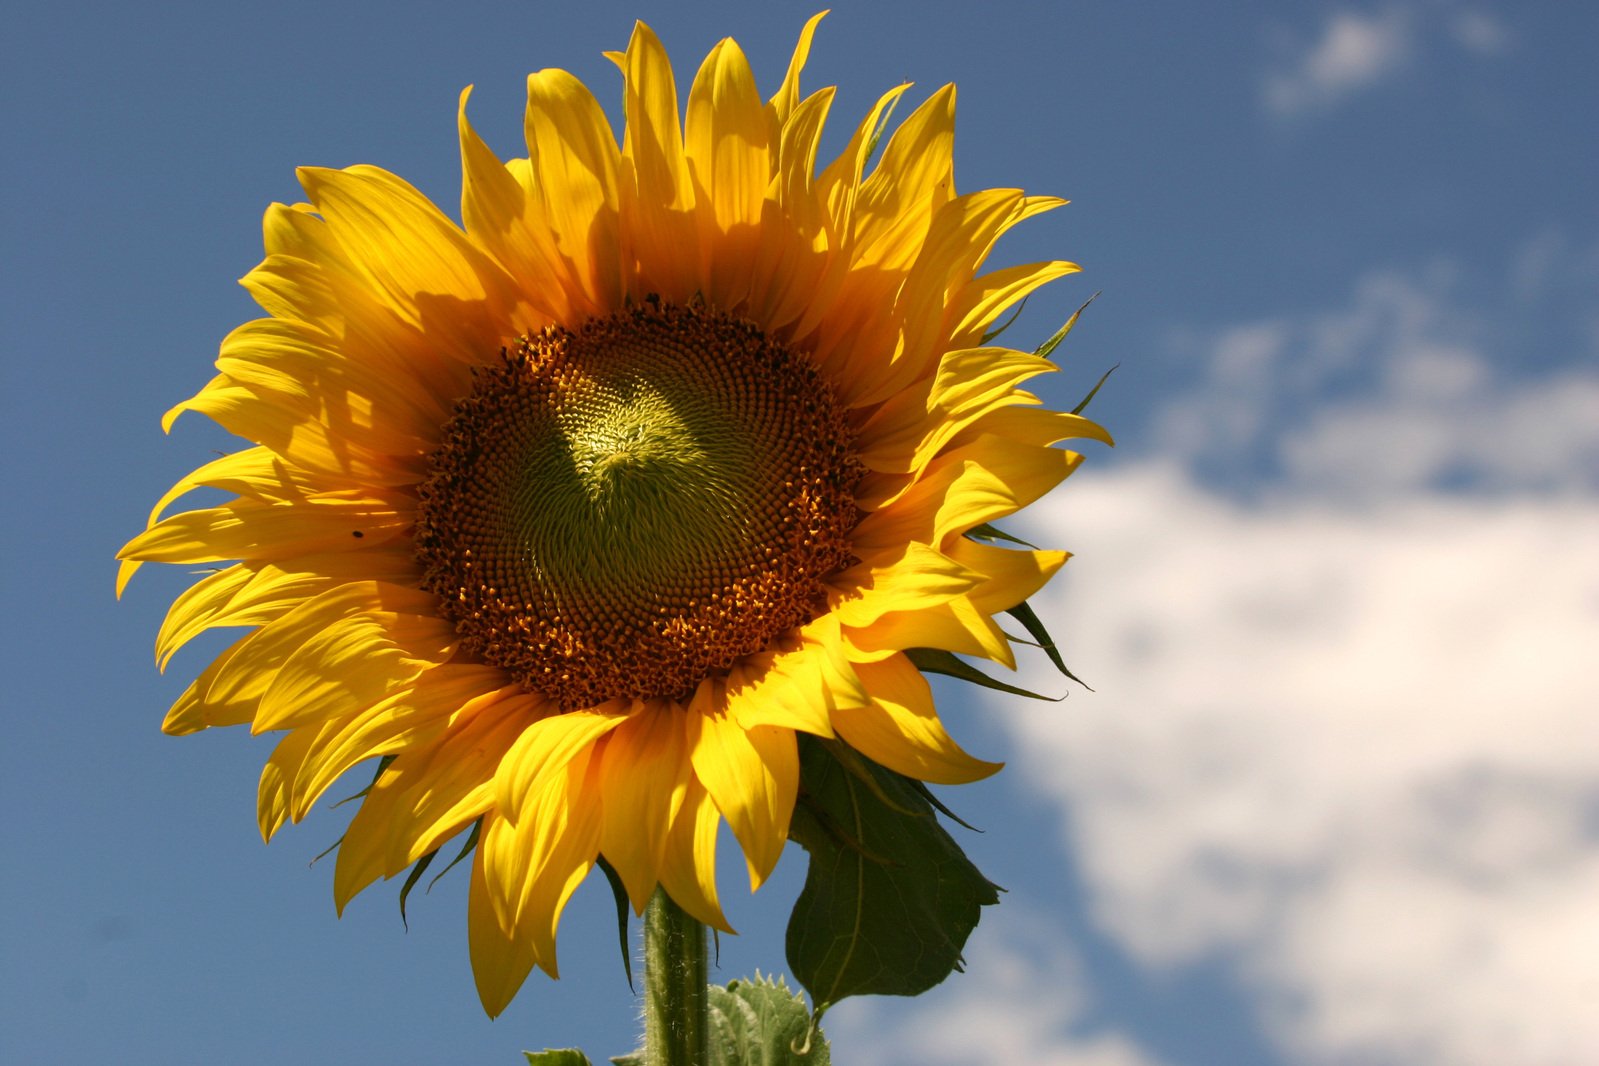 the sunflower is blooming on a sunny day